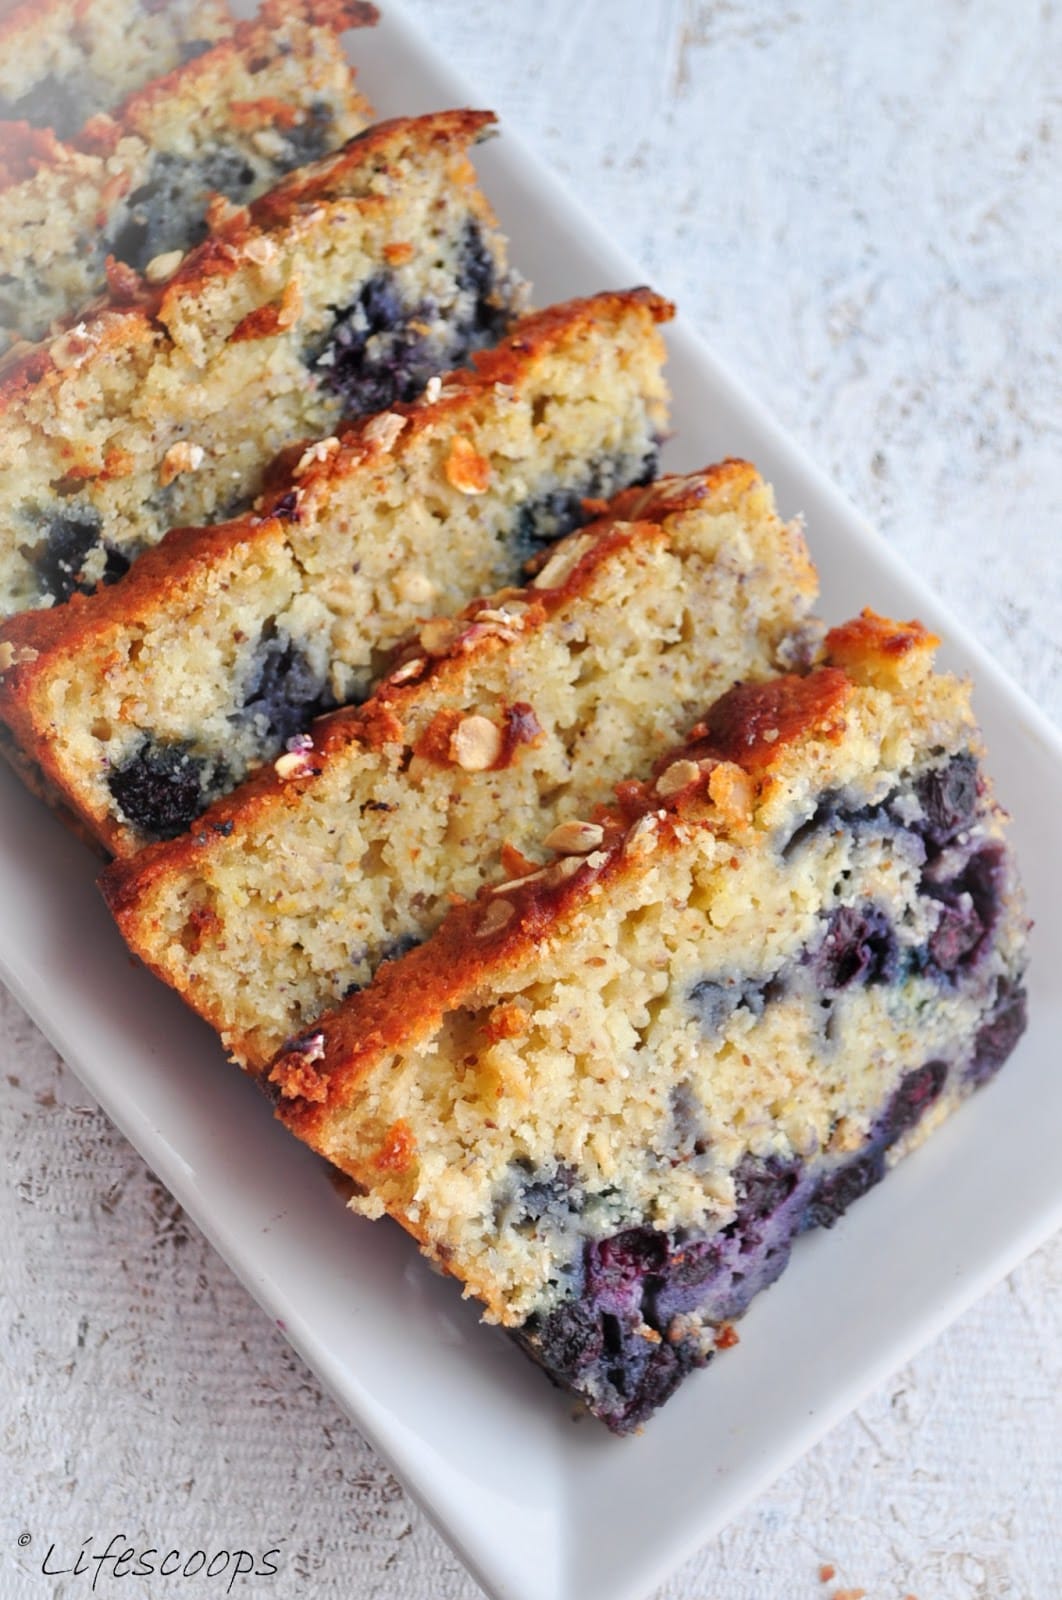 This Lemon Blueberry Oatmeal Bread is really moist with oodles of succulent blueberries in it and the texture is sort of a hybrid between that of a cake and a bread.